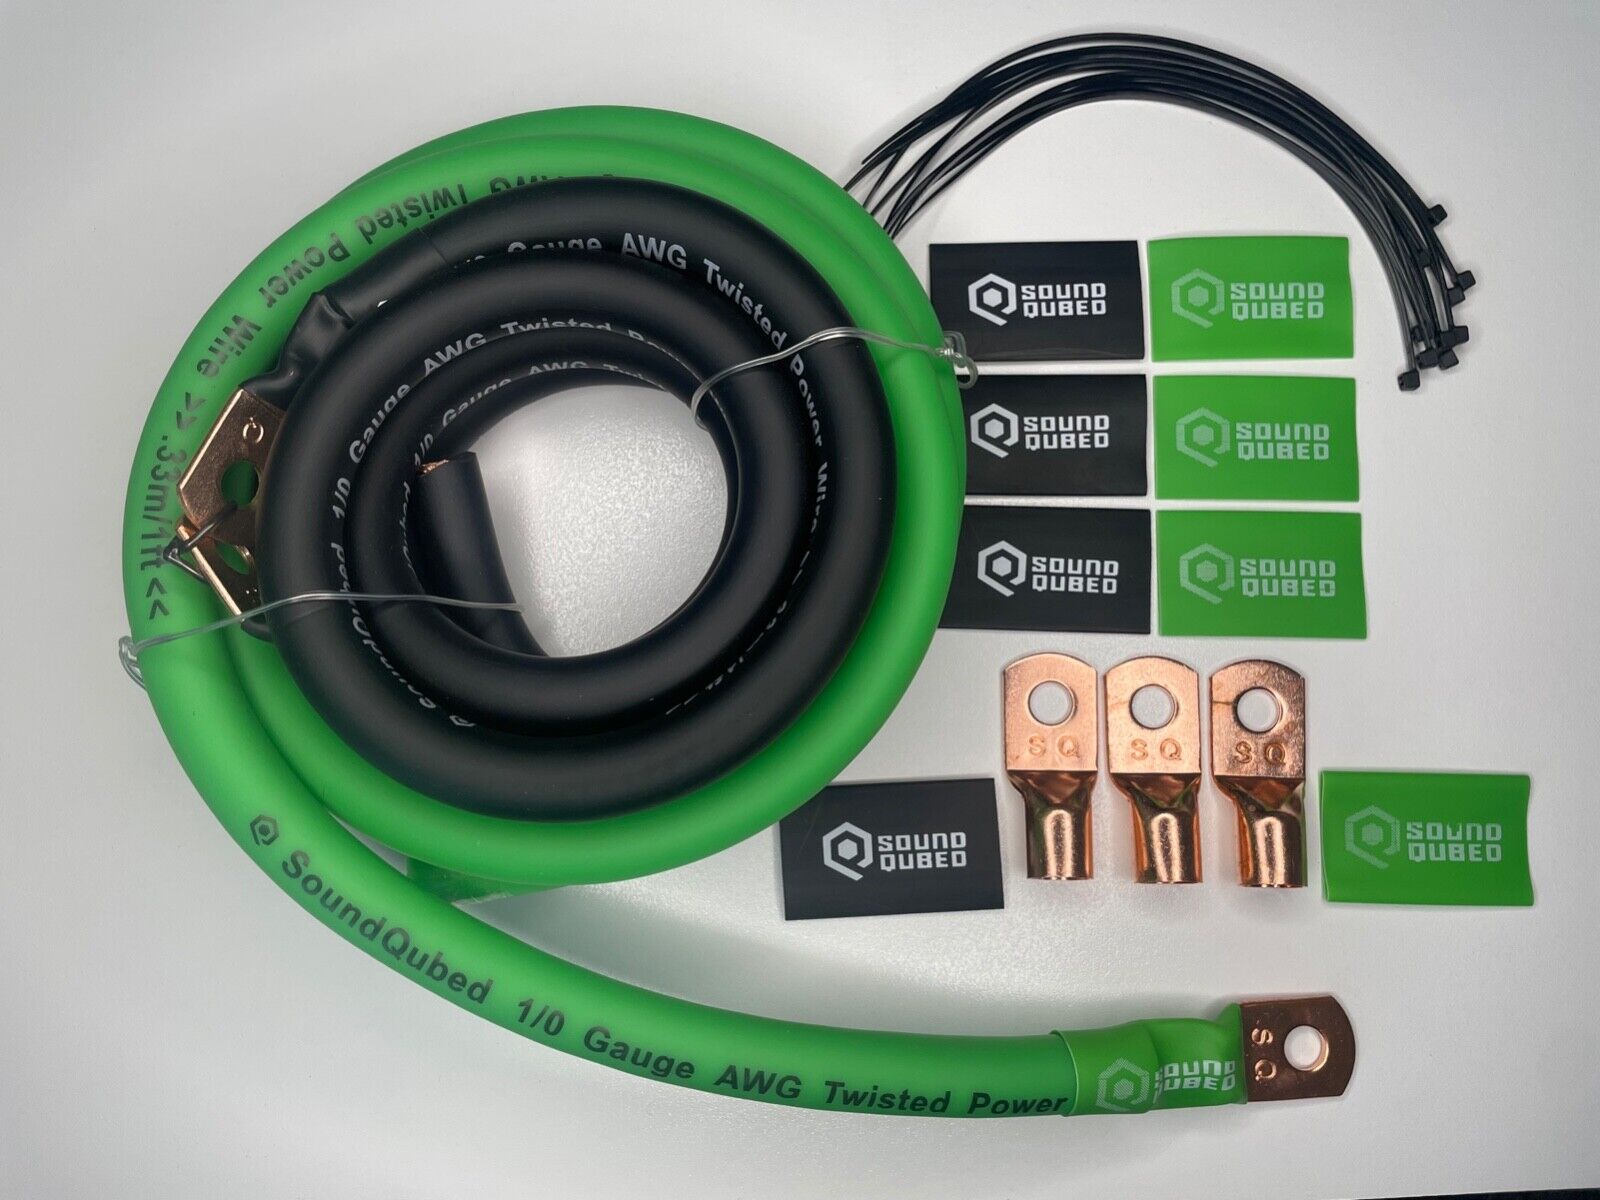 Soundqubed 1/0 AWG Big 3 Green/Black Electrical Wiring Kit